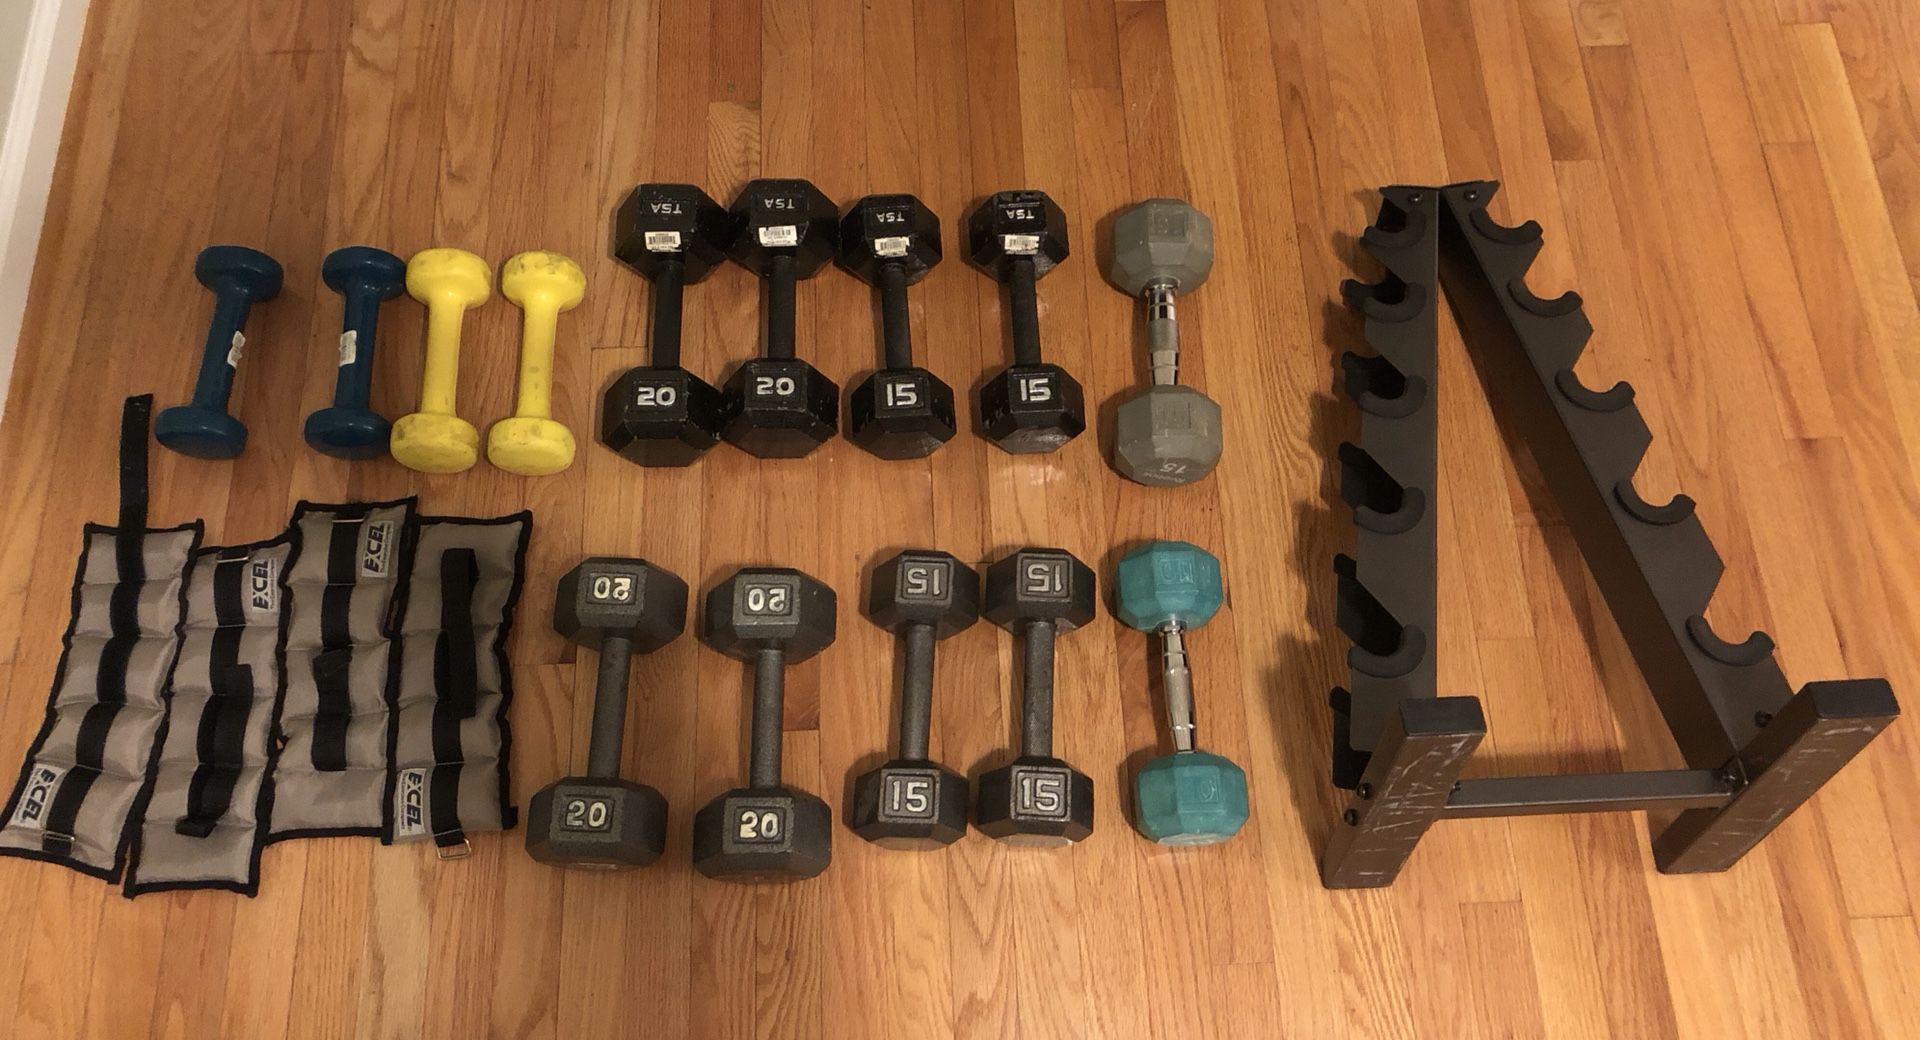 Exercise equipment- dumbbells and weight rack